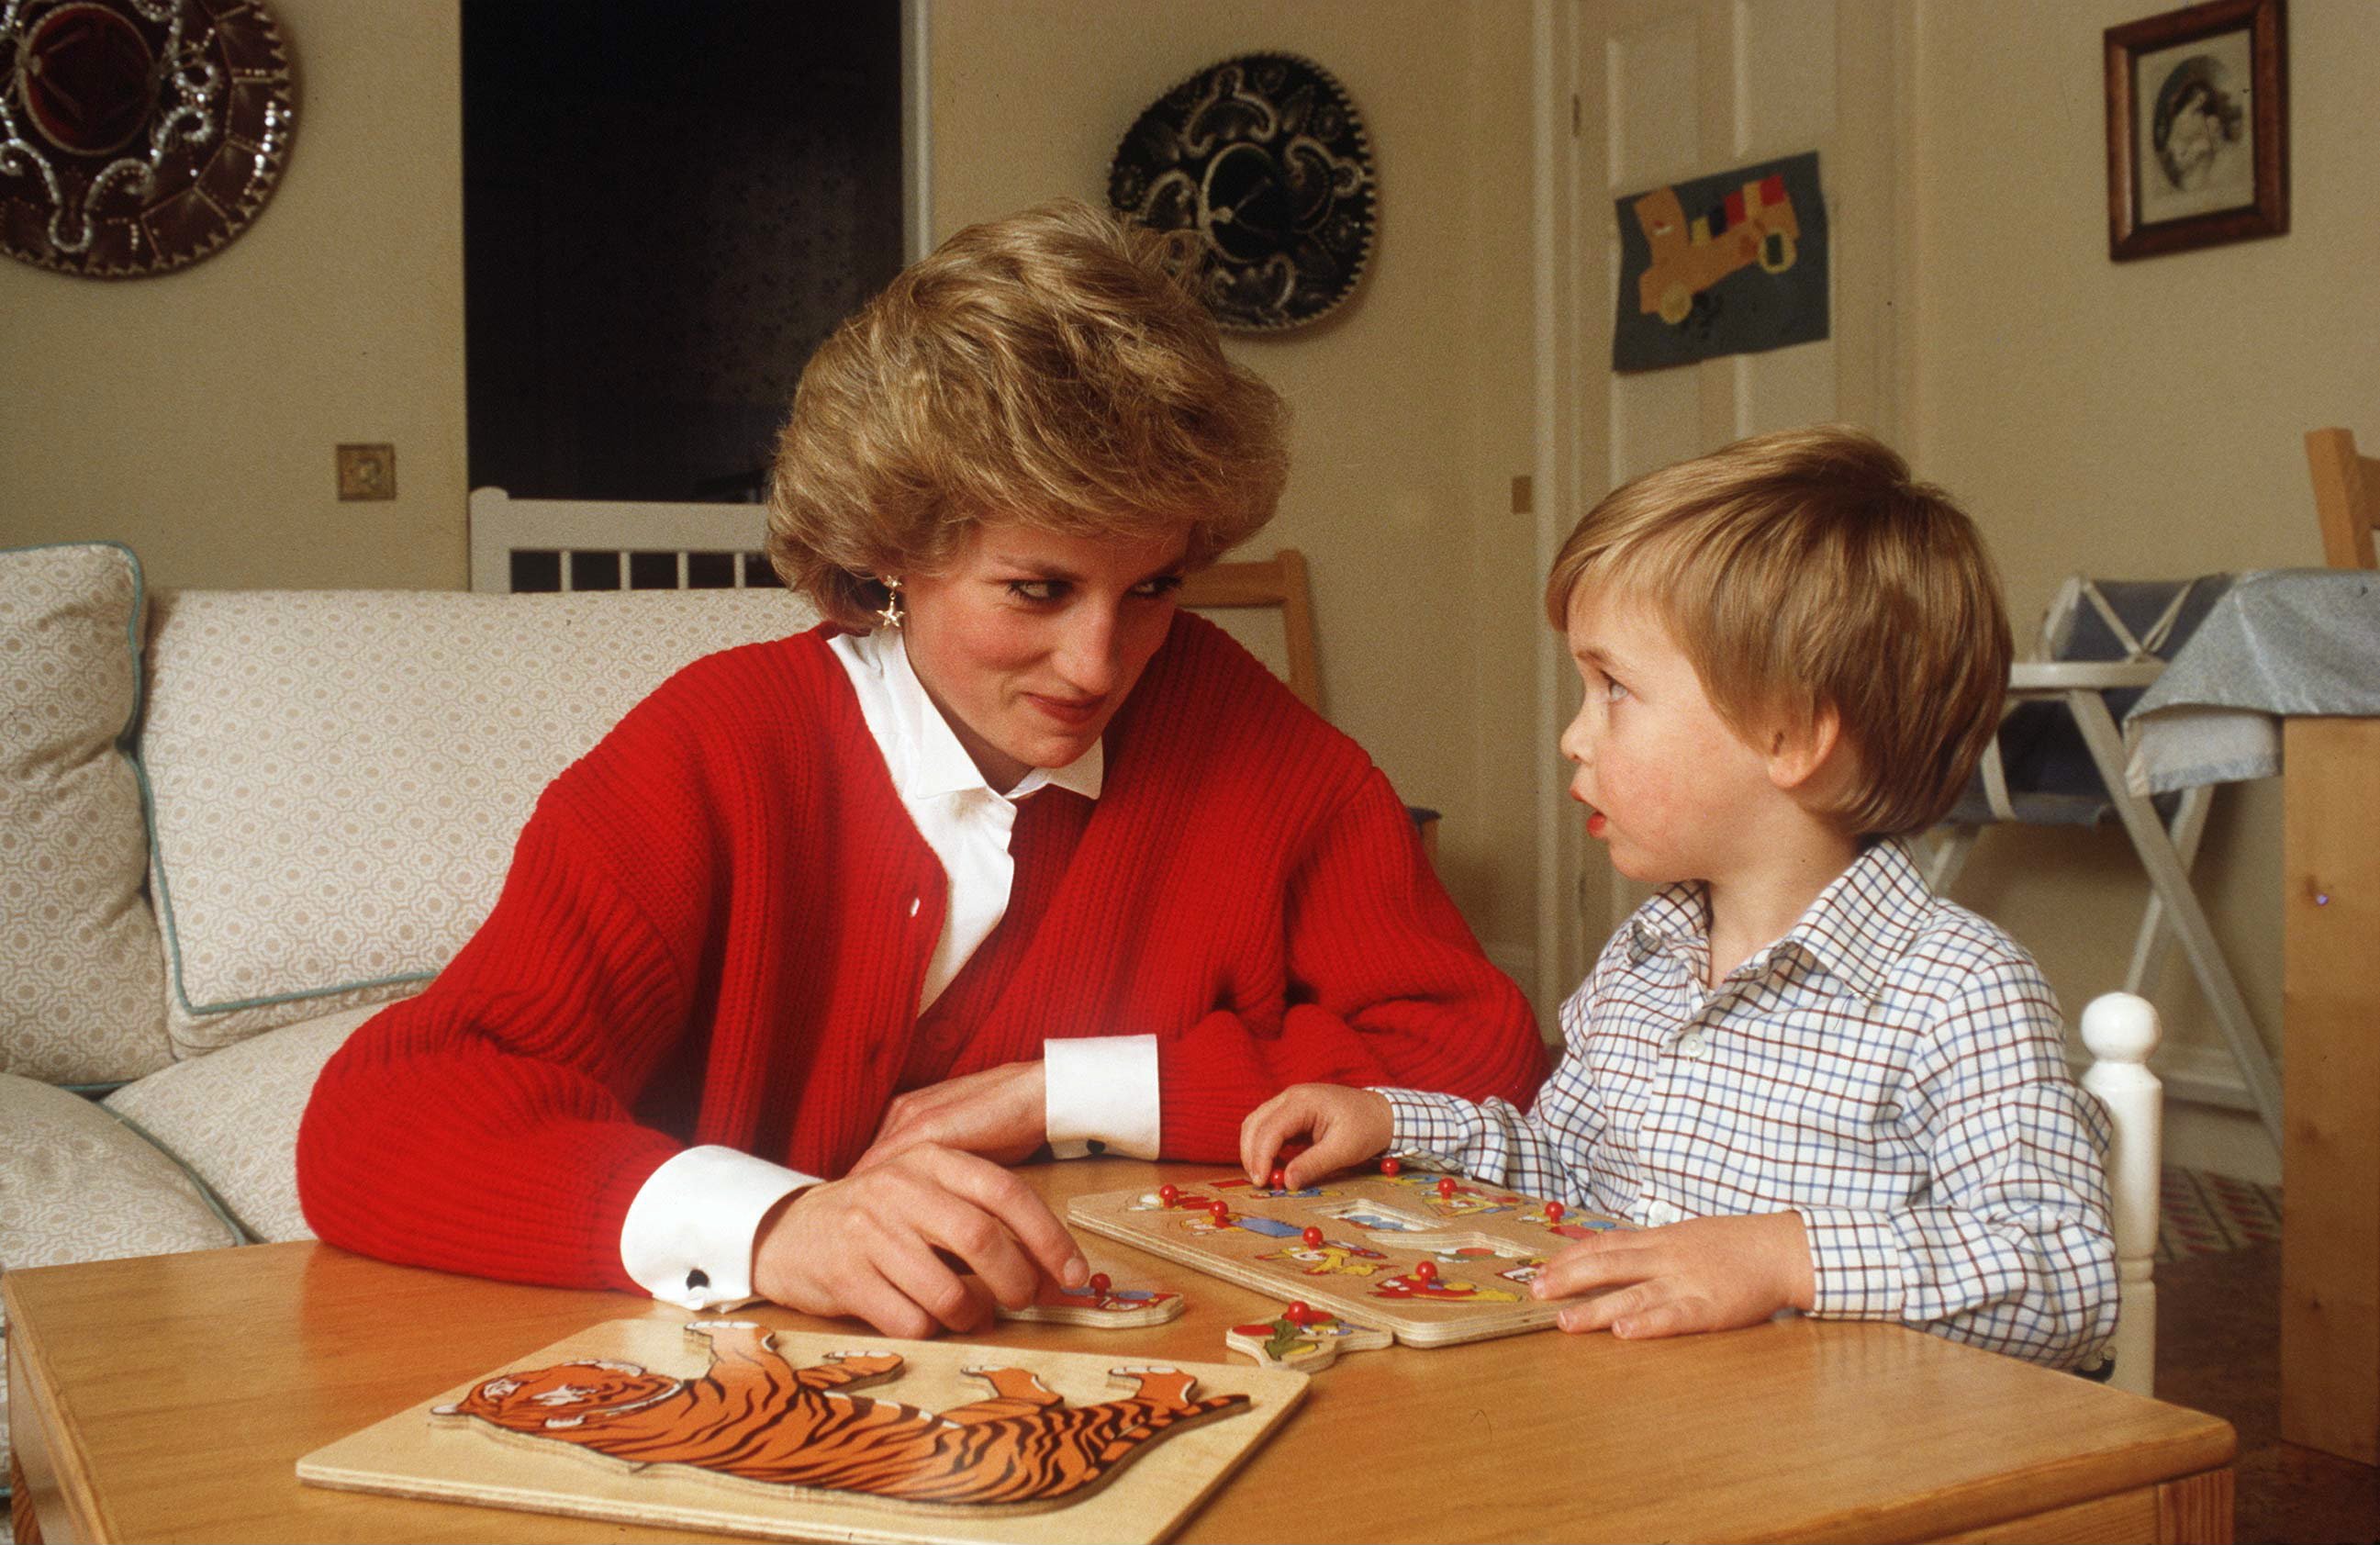  Princess Diana helping Prince William with a puzzle